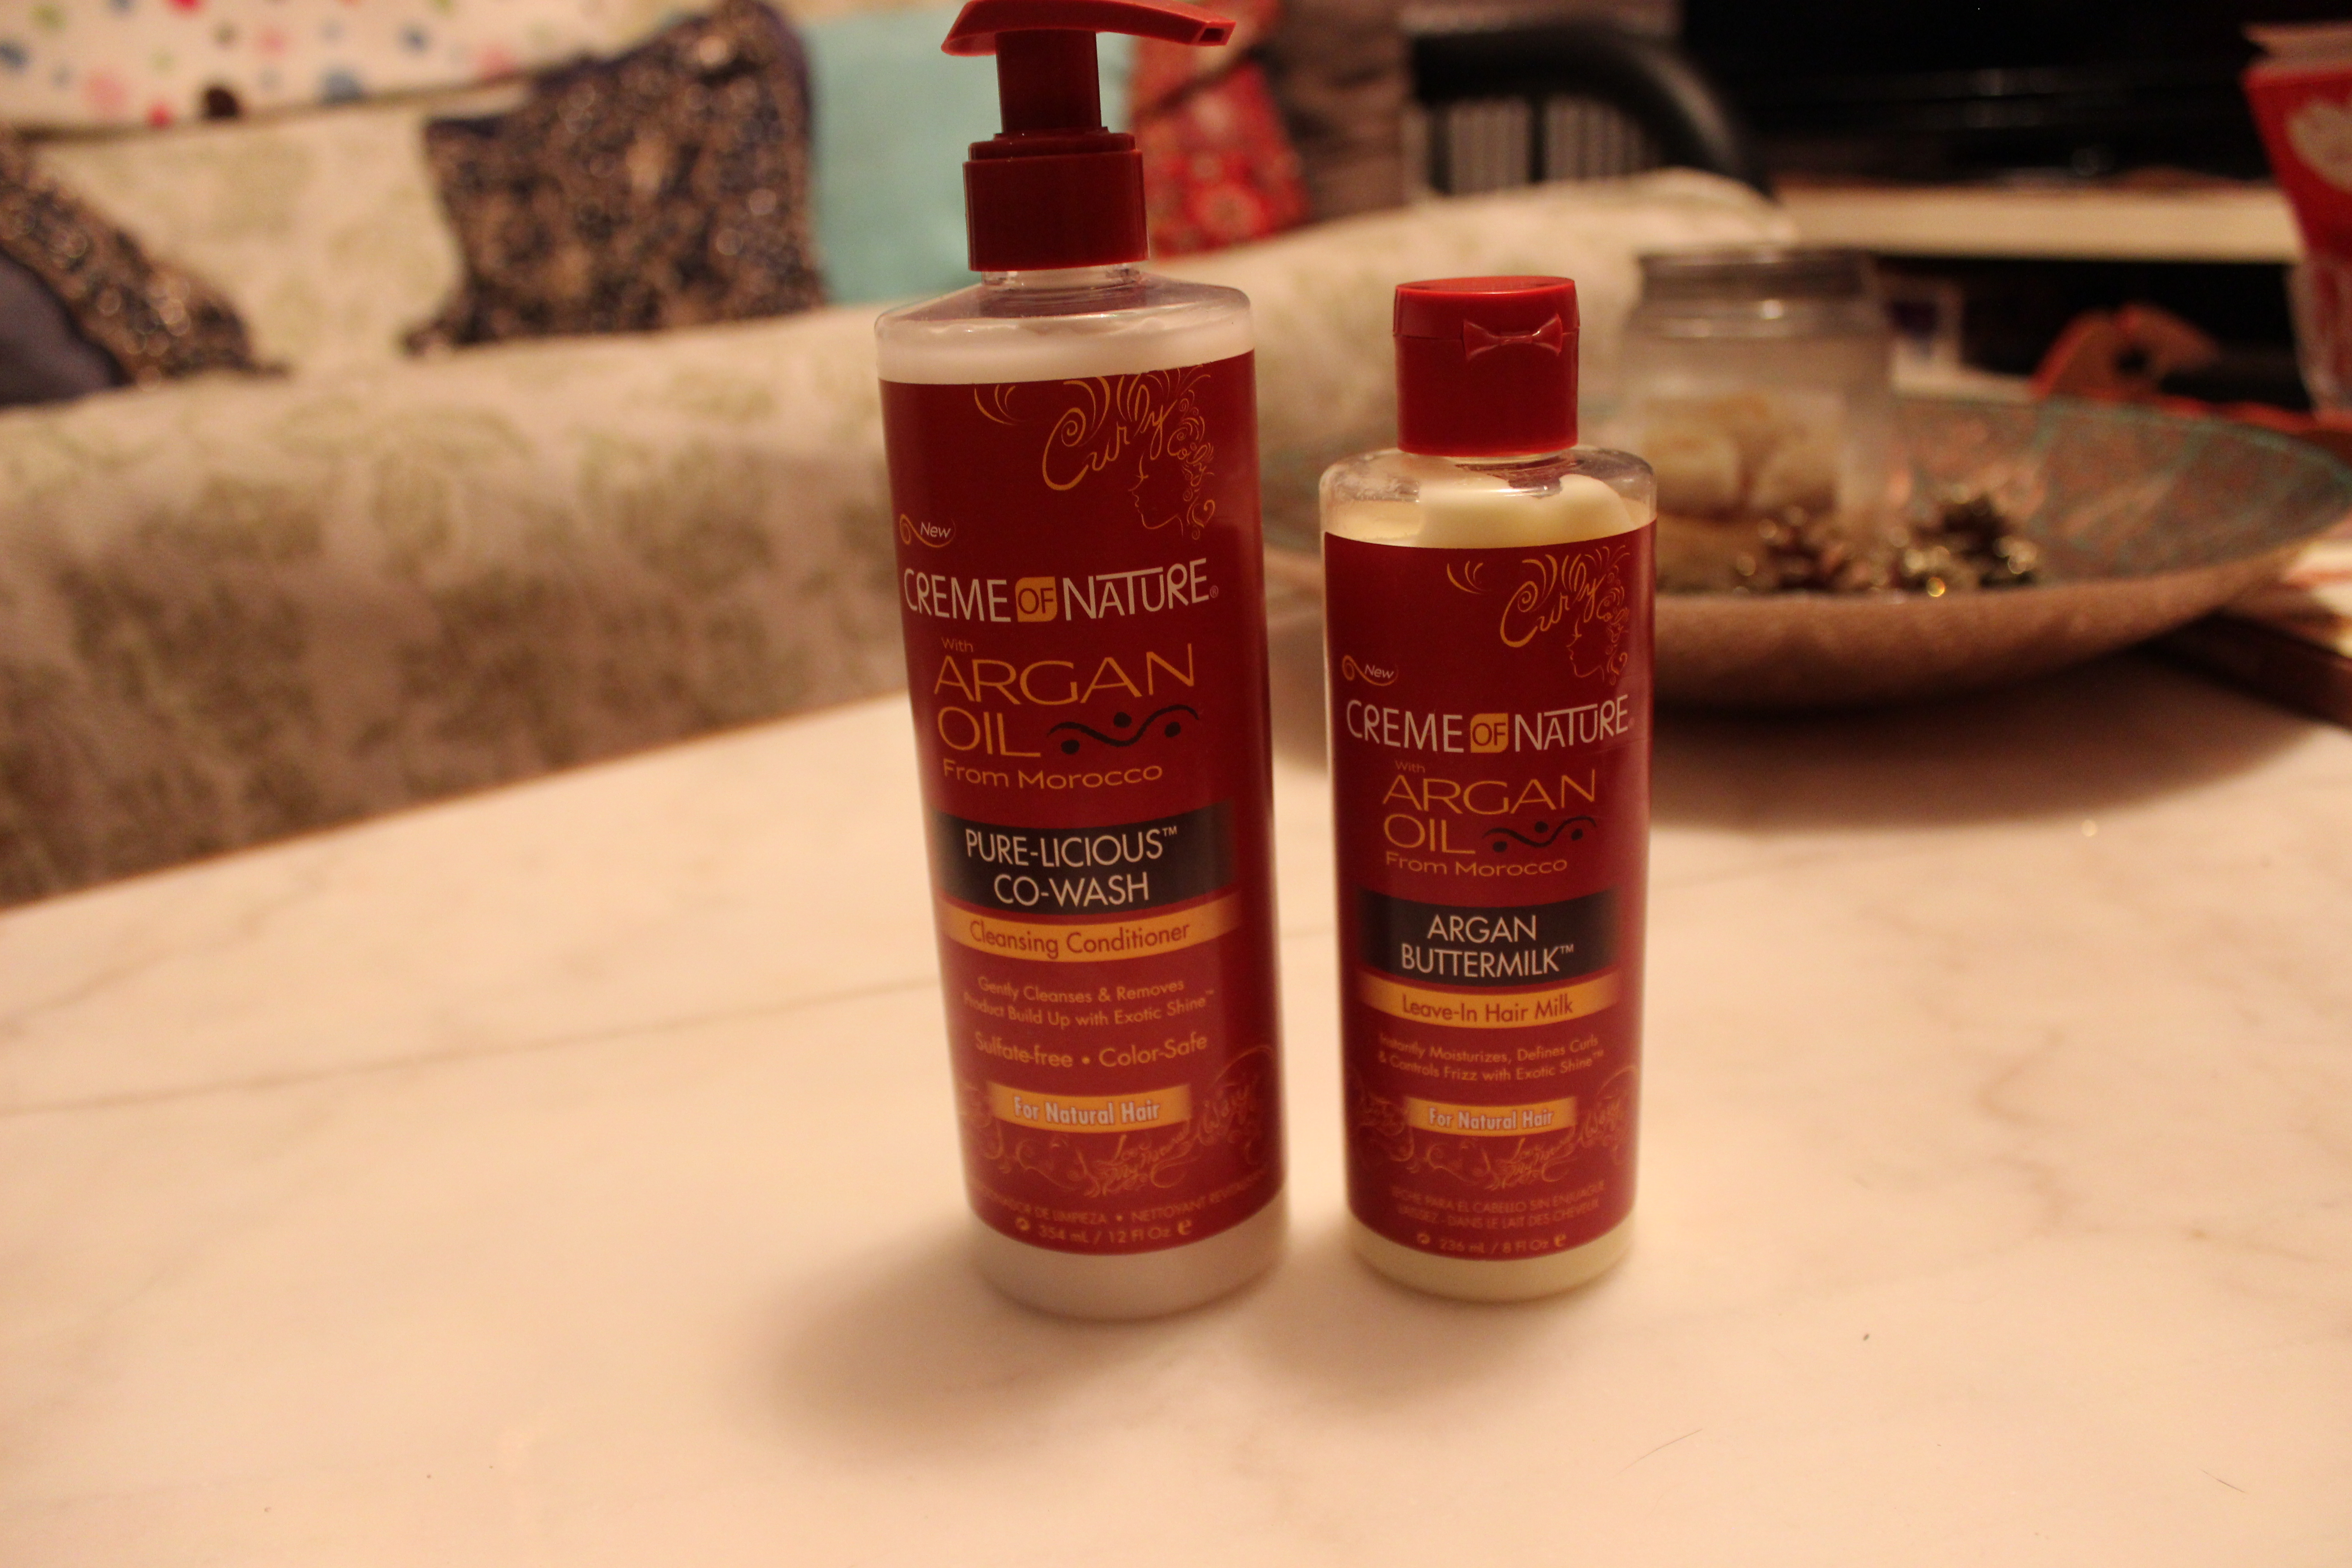 Creme of Nature Pure-Licious Co-Wash & Argan Buttermilk Leave-In Hair Milk Giveaway!